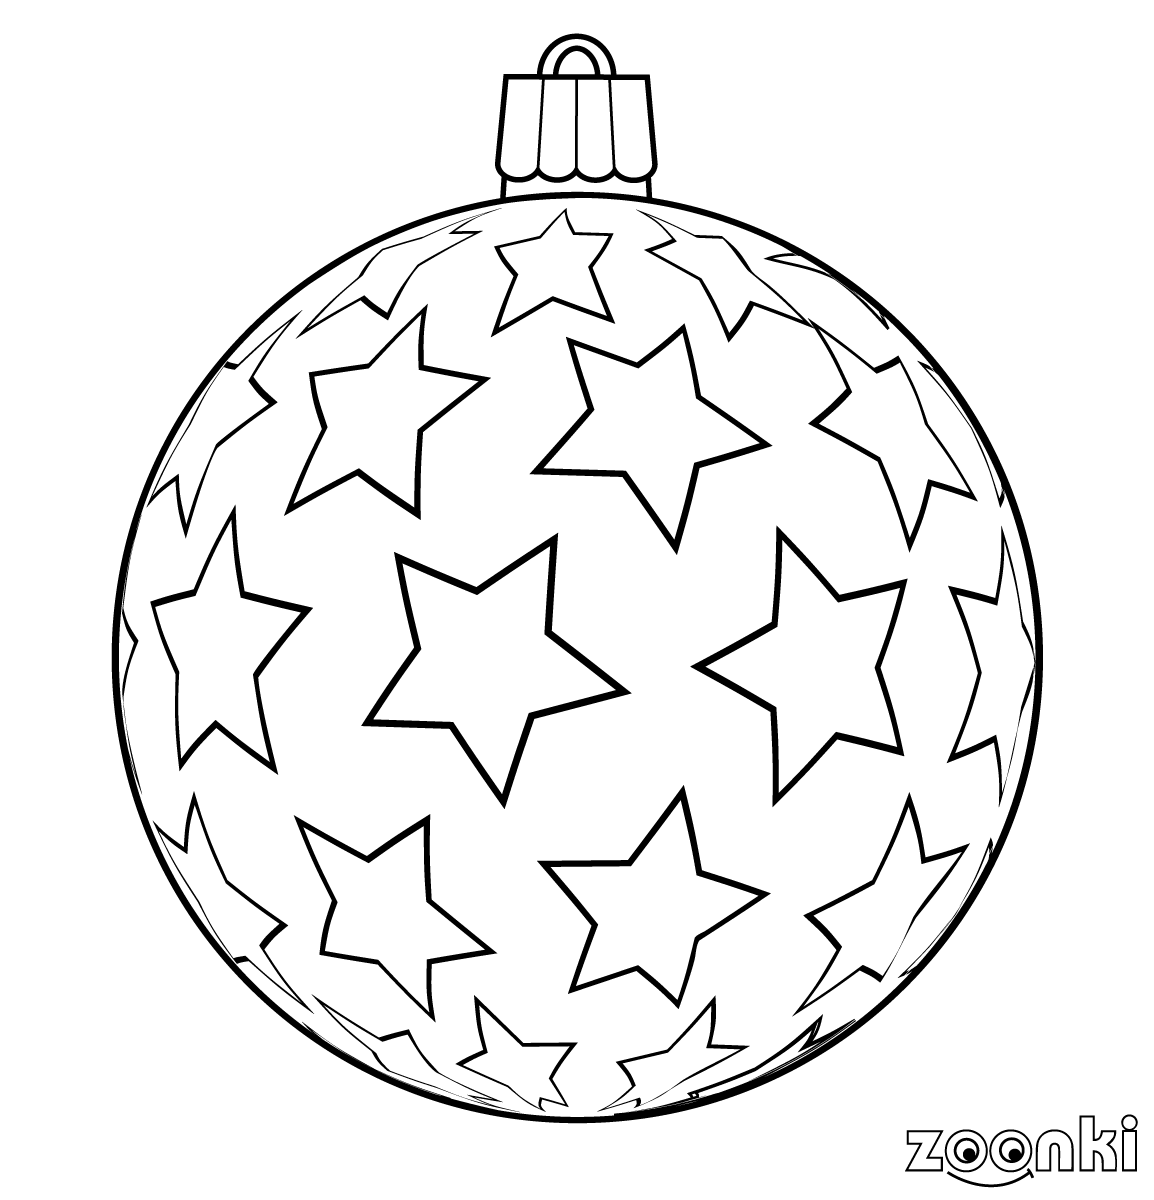 zoonki black & white Christmas bauble for coloring